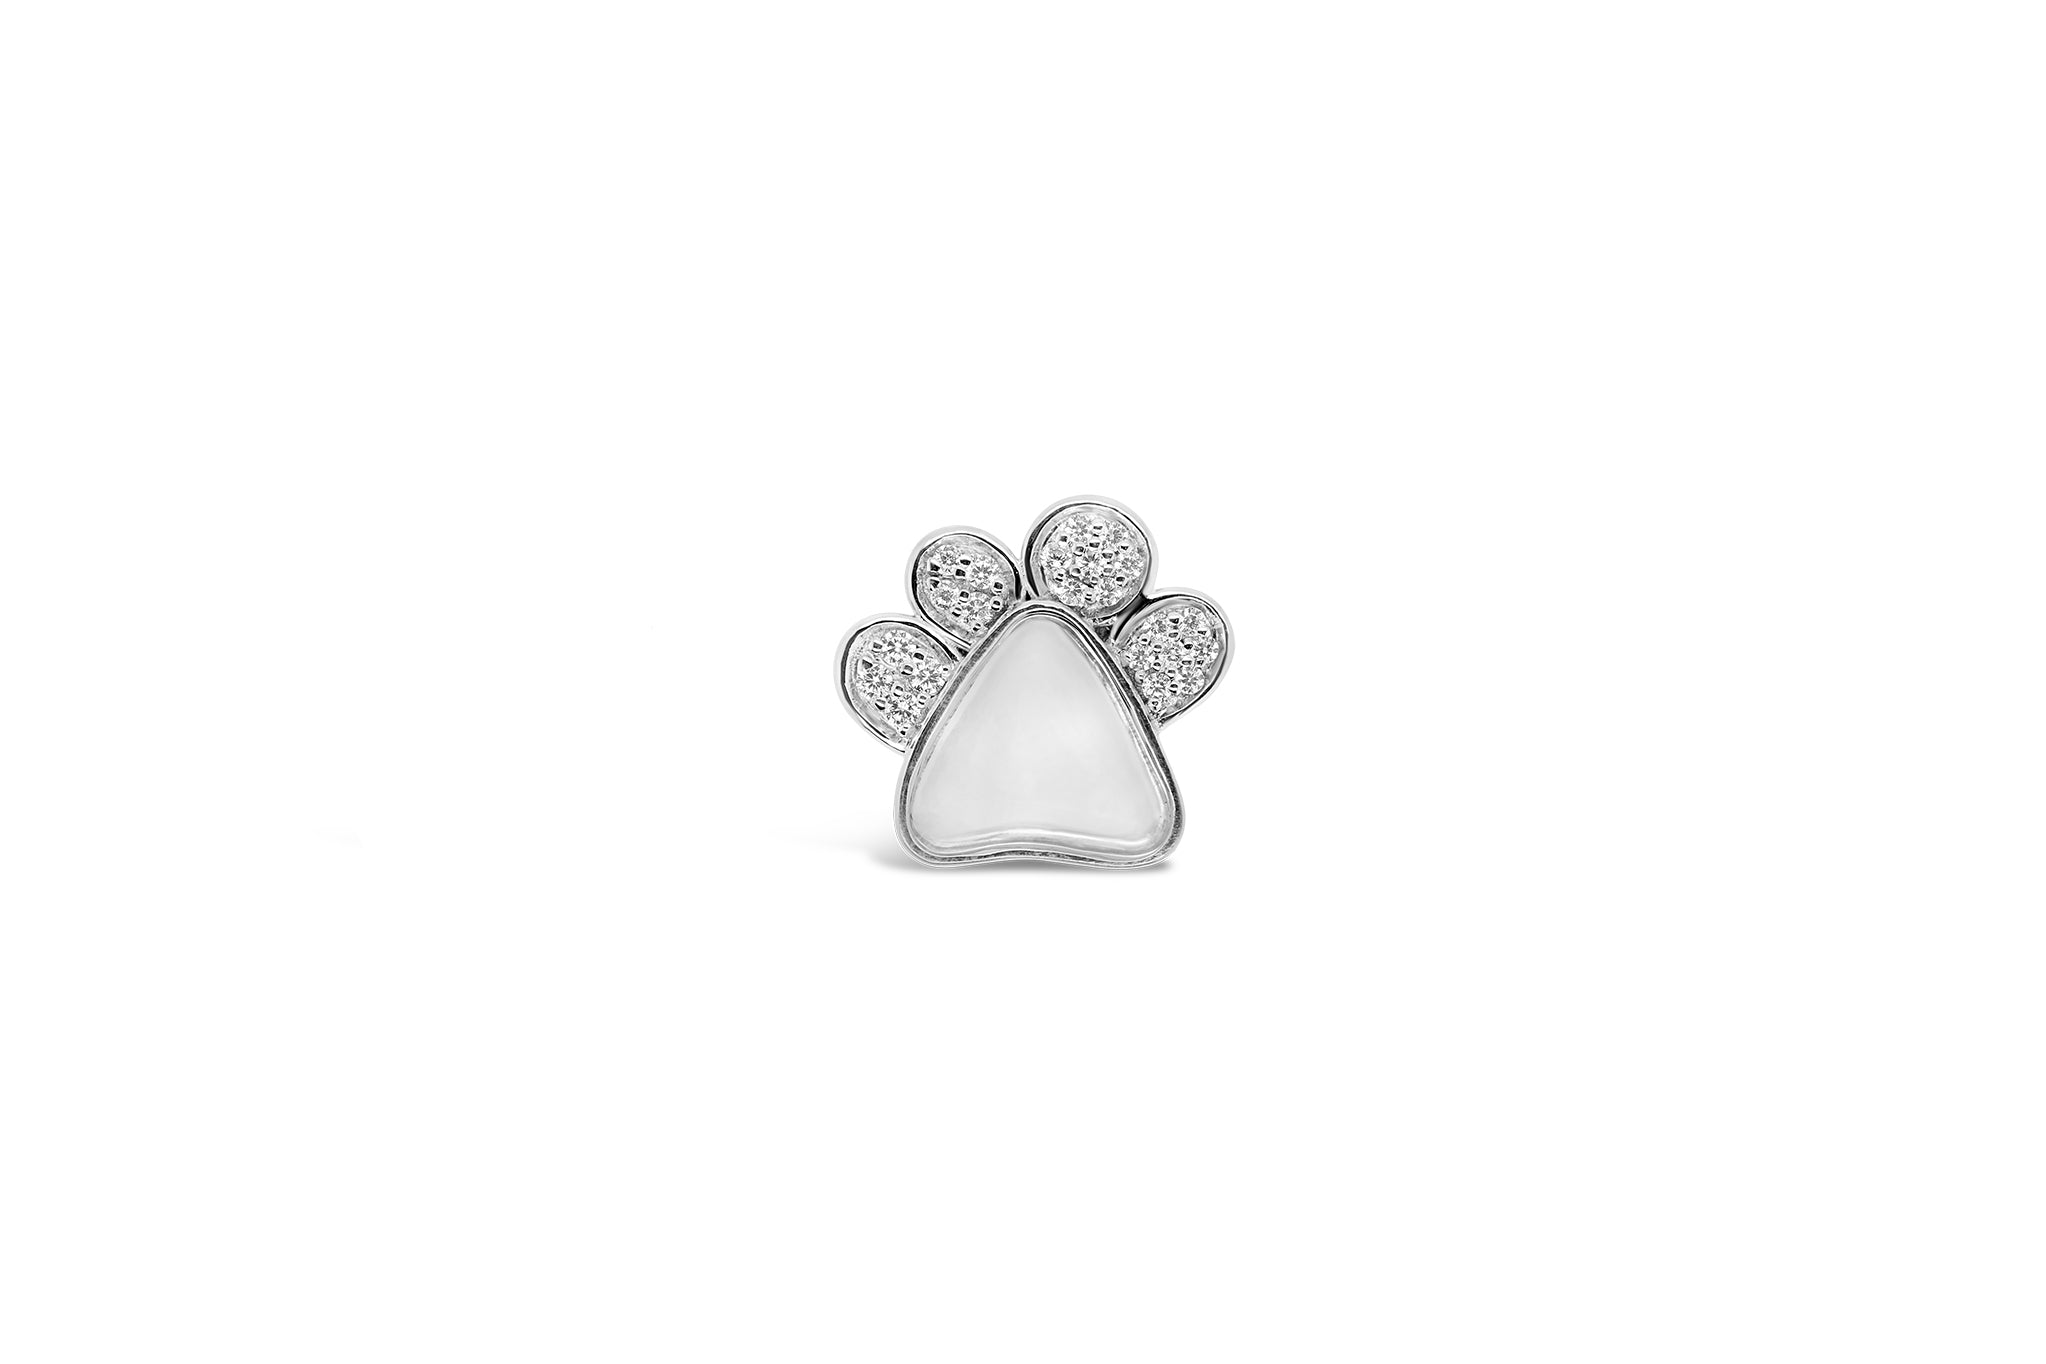 Forever Close Pendant - MJ057 - Hallmark Jewellers Formby & The Jewellers Bench Widnes